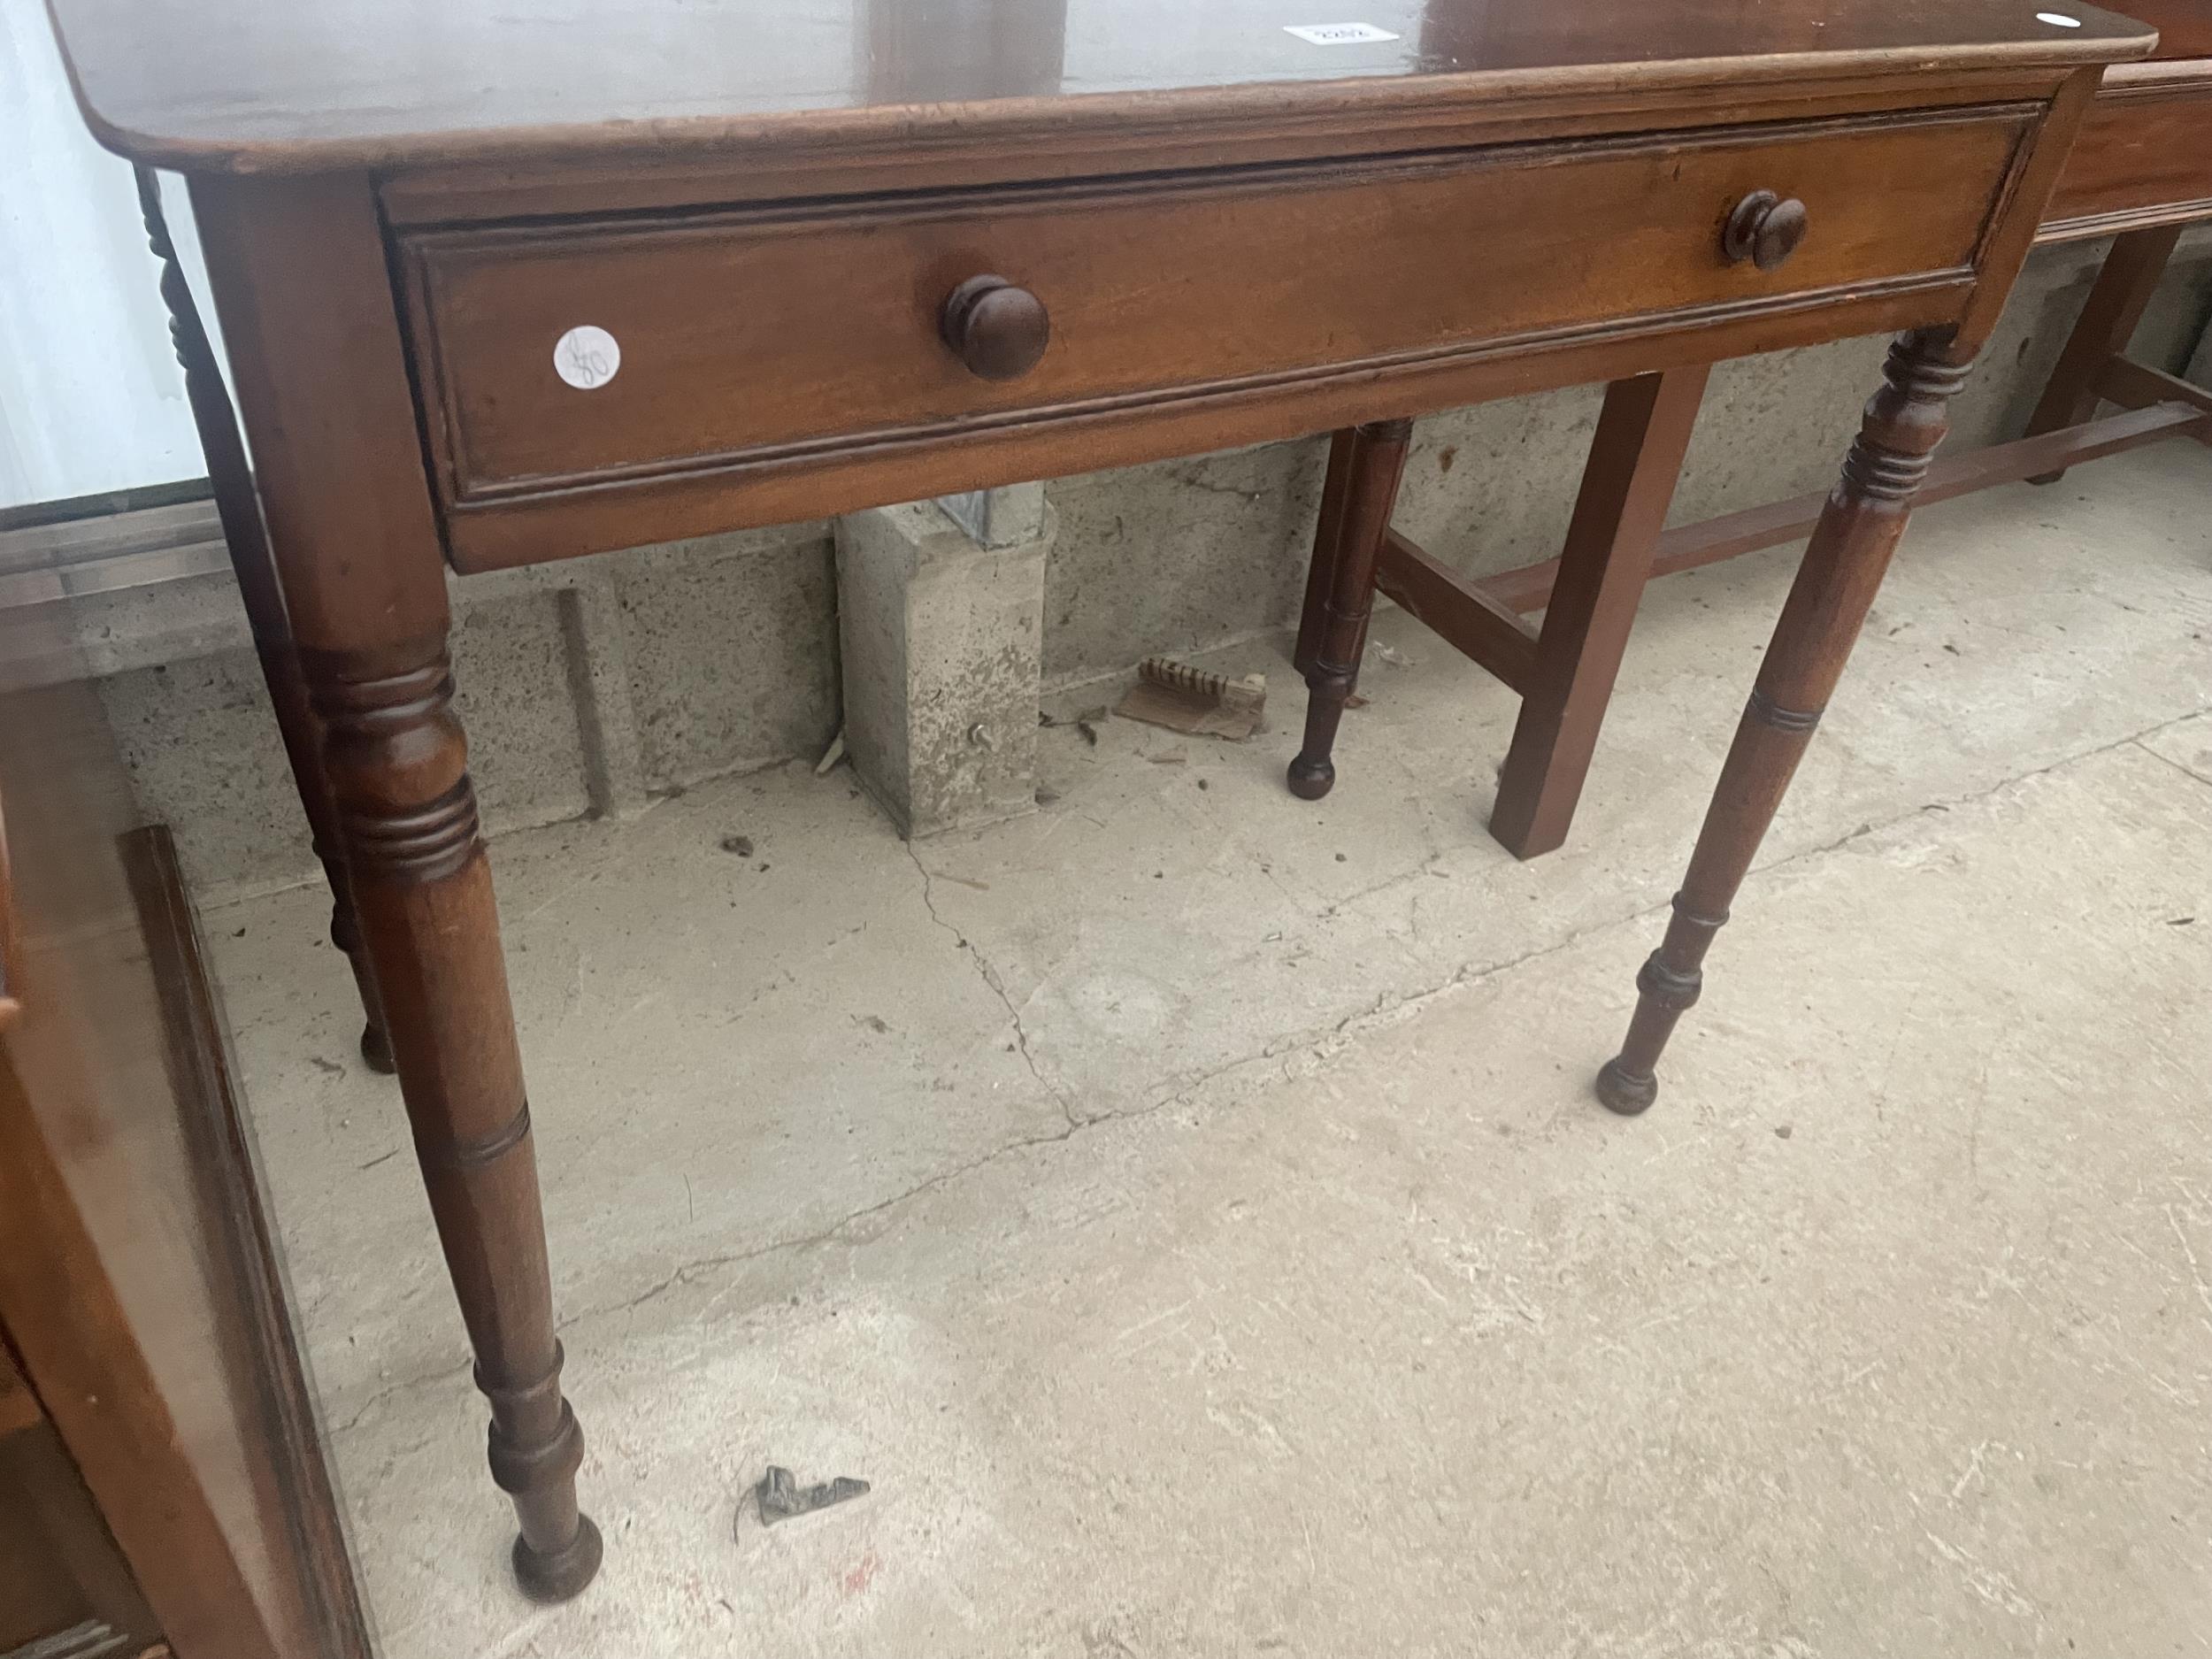 A 19TH CENTURY MAHOGANY SIDE TABLE WITH SINGLE DRAWER, ON TURNED LEGGS, 33.5" WIDE - Image 3 of 4